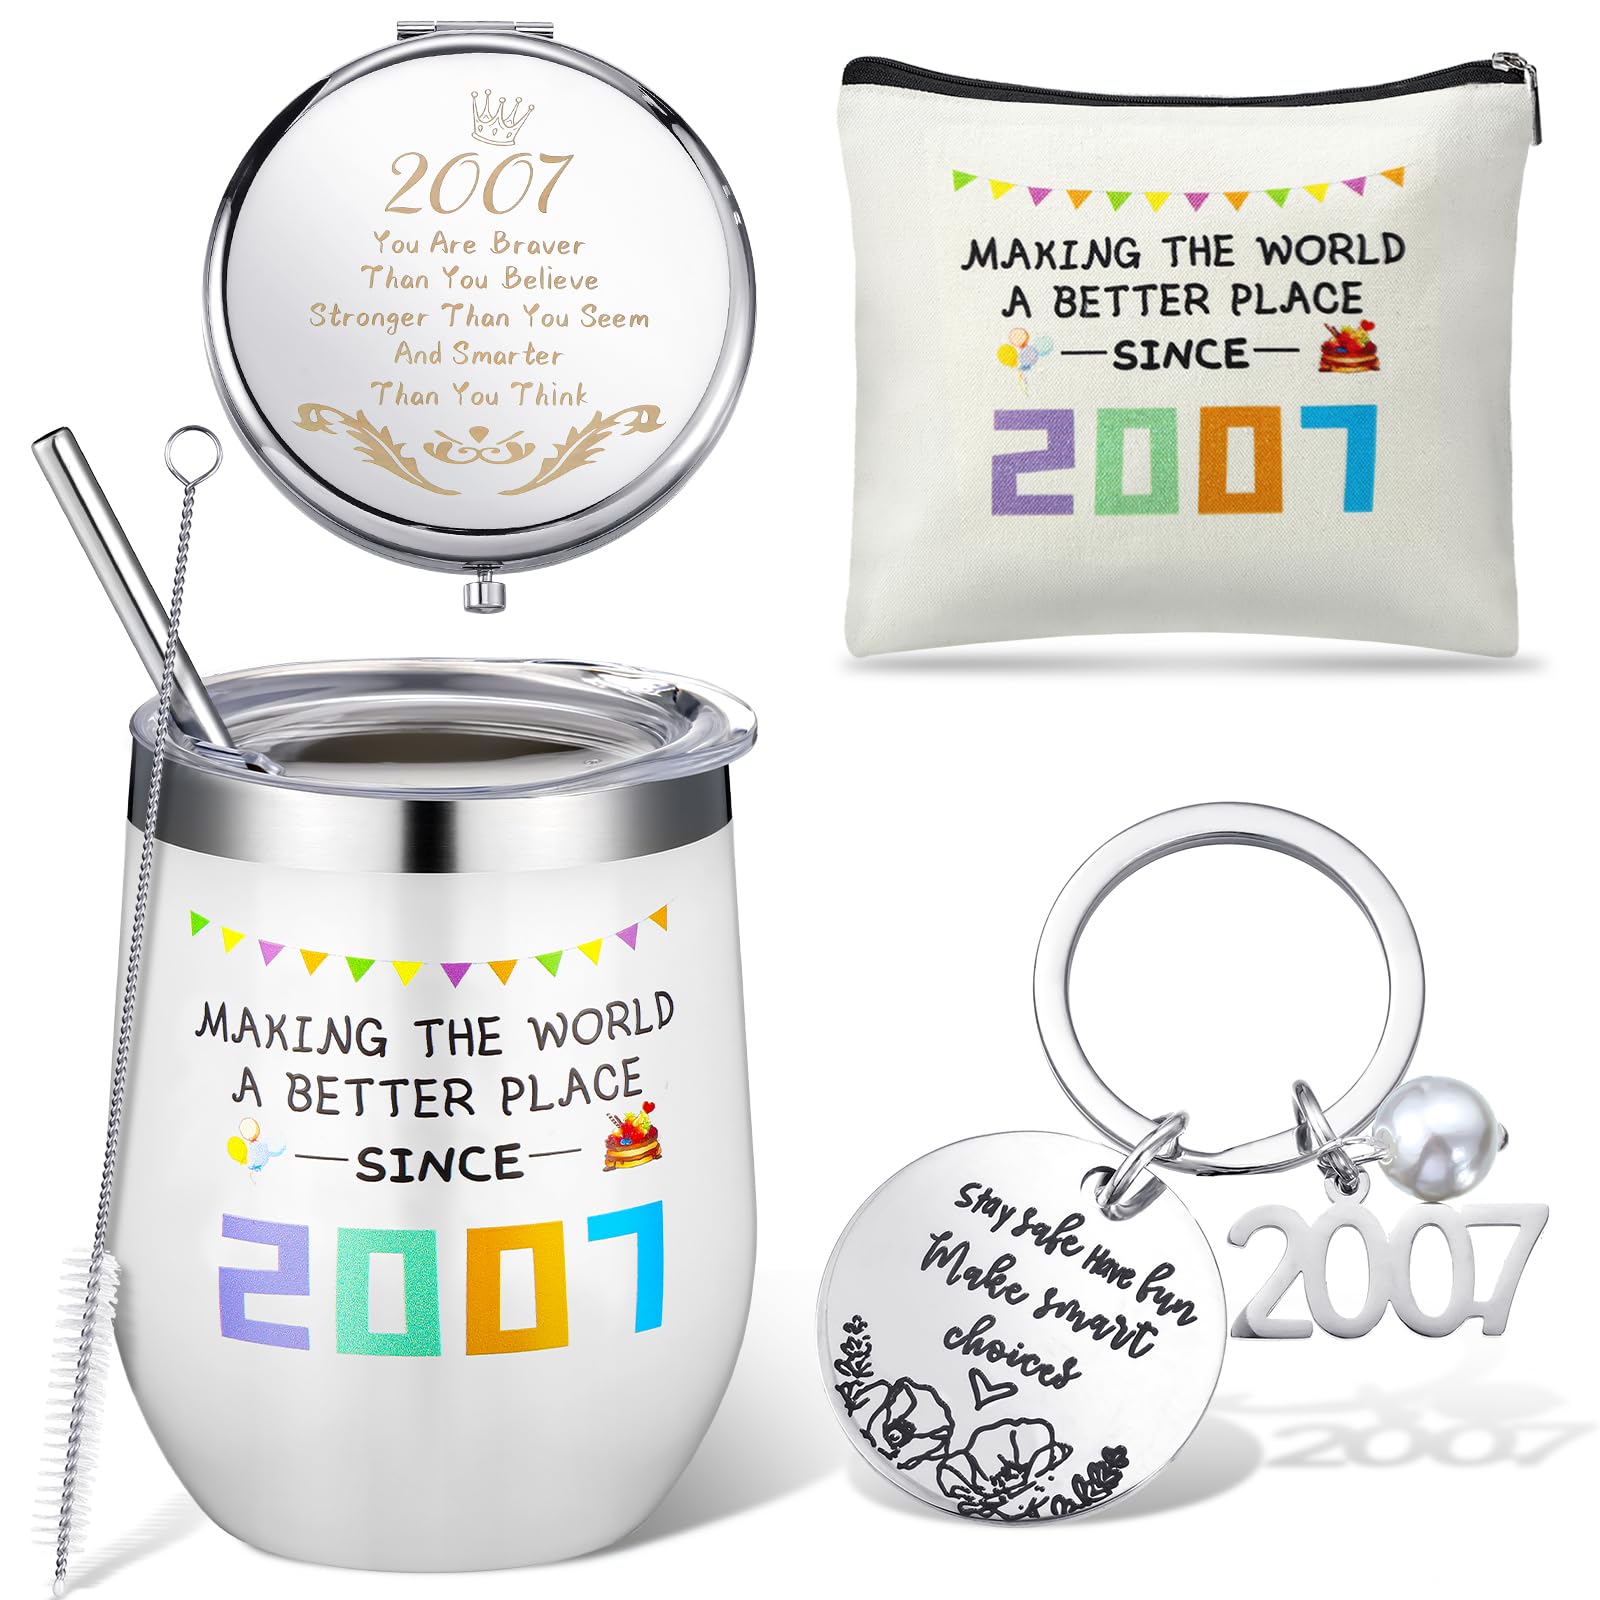 Didaey 14/16/17/18/19/22 Years Old Birthday Sweet Gift Makeup Bag 12 oz Tumbler Keychain Makeup Mirror for Daughter Bff Mother(17th Birthday)